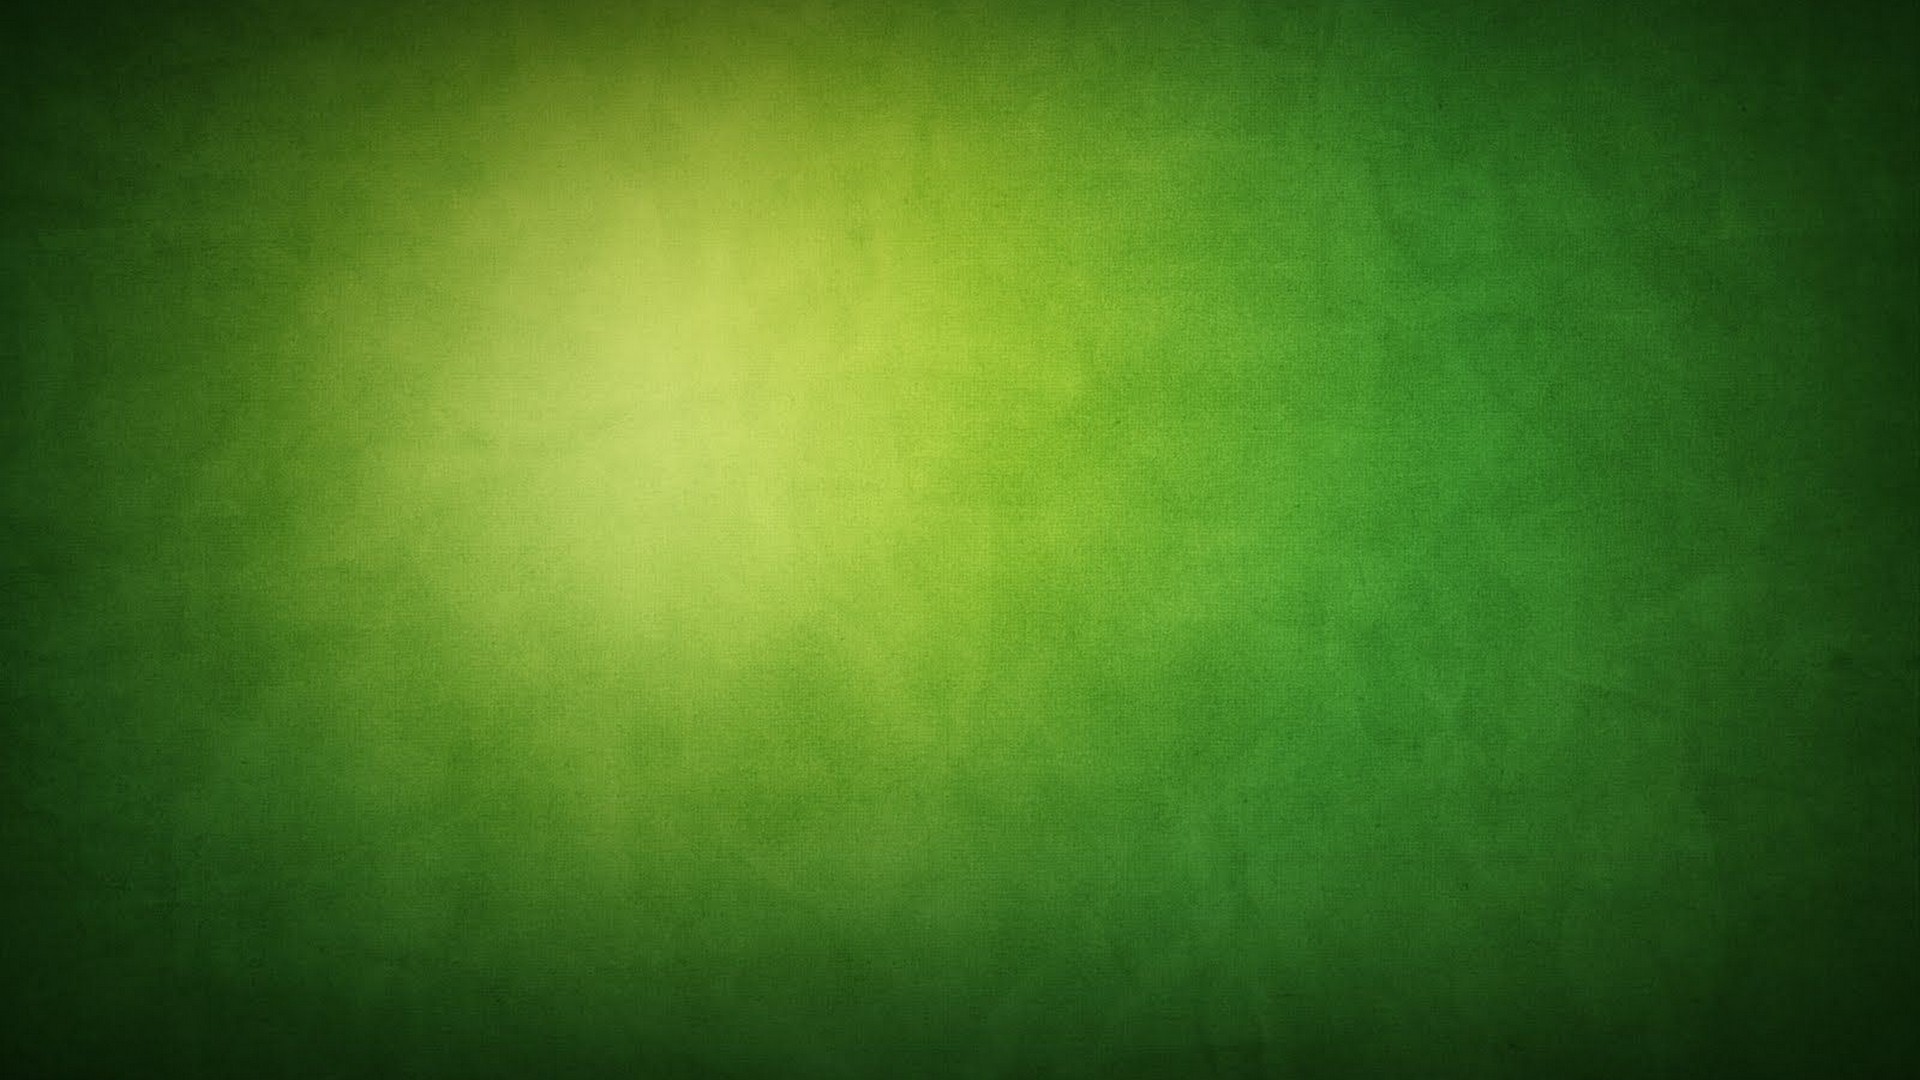 Dark Green Desktop Backgrounds HD with image resolution 1920x1080 pixel. You can use this wallpaper as background for your desktop Computer Screensavers, Android or iPhone smartphones